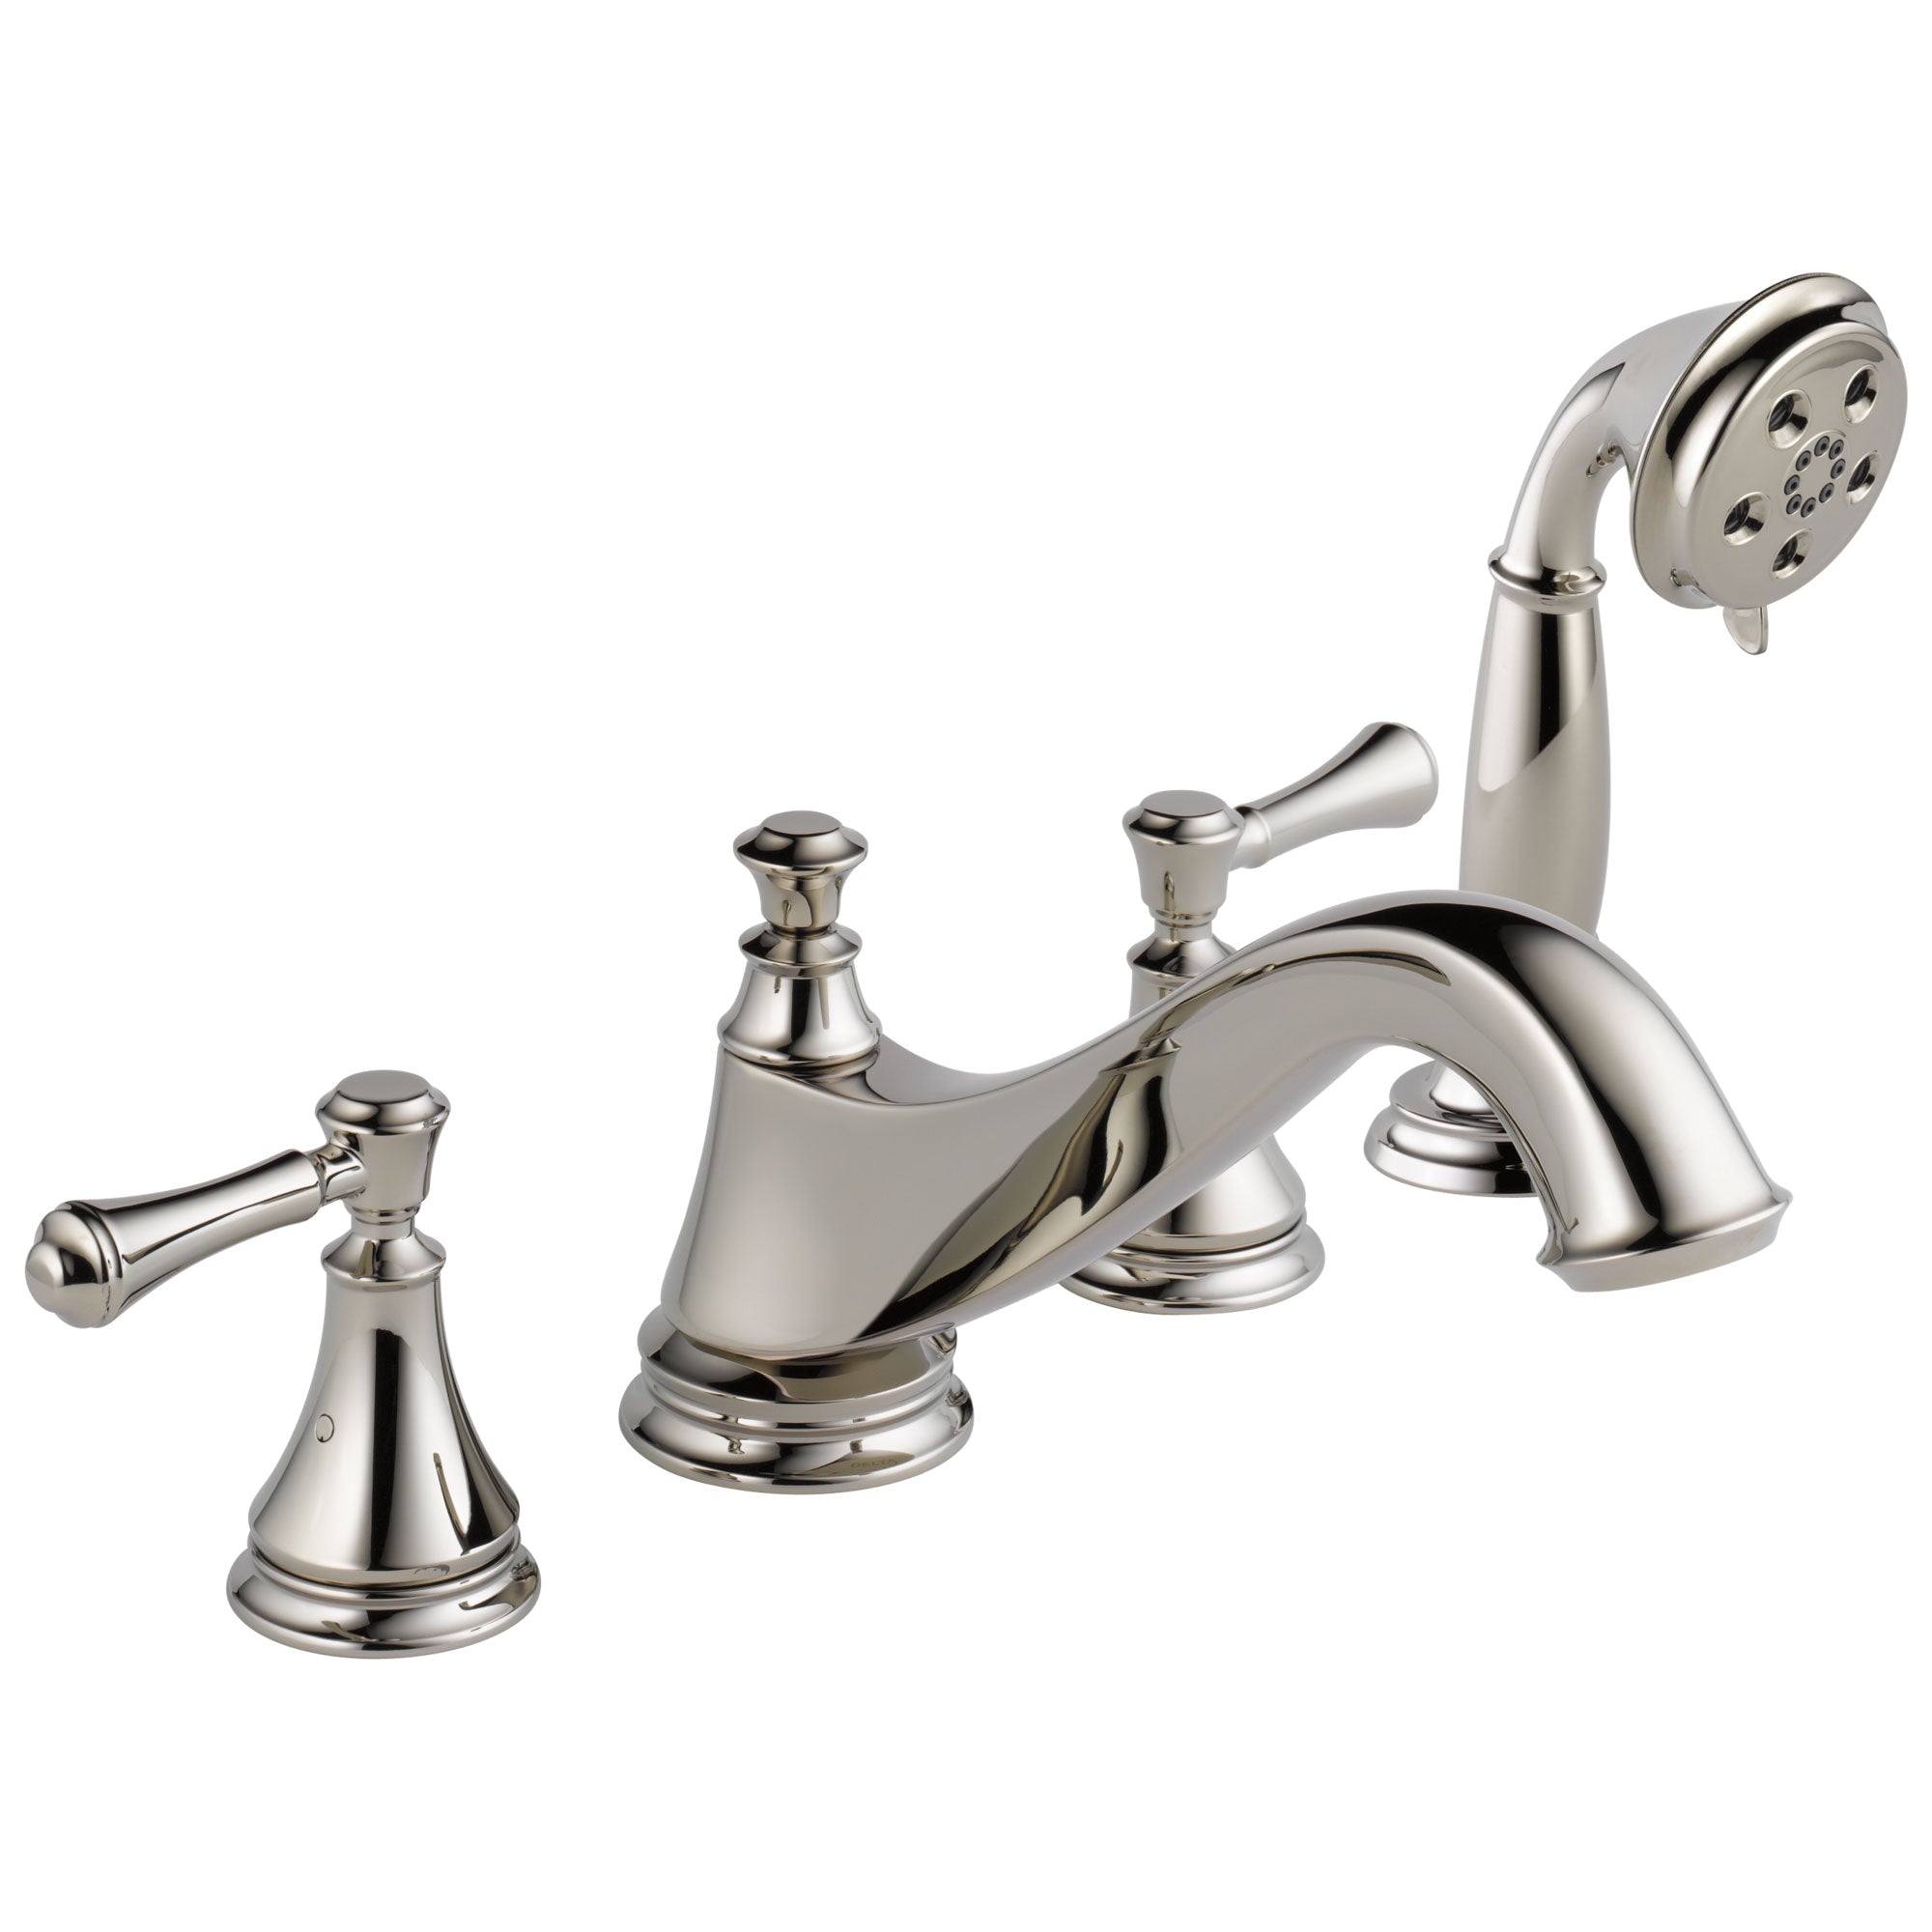 Delta Cassidy Collection Polished Nickel Classic Spout Roman Tub Filler Faucet Trim Kit with Hand Shower INCLUDES (2) Lever Handles and Rough-in Valve D1413V